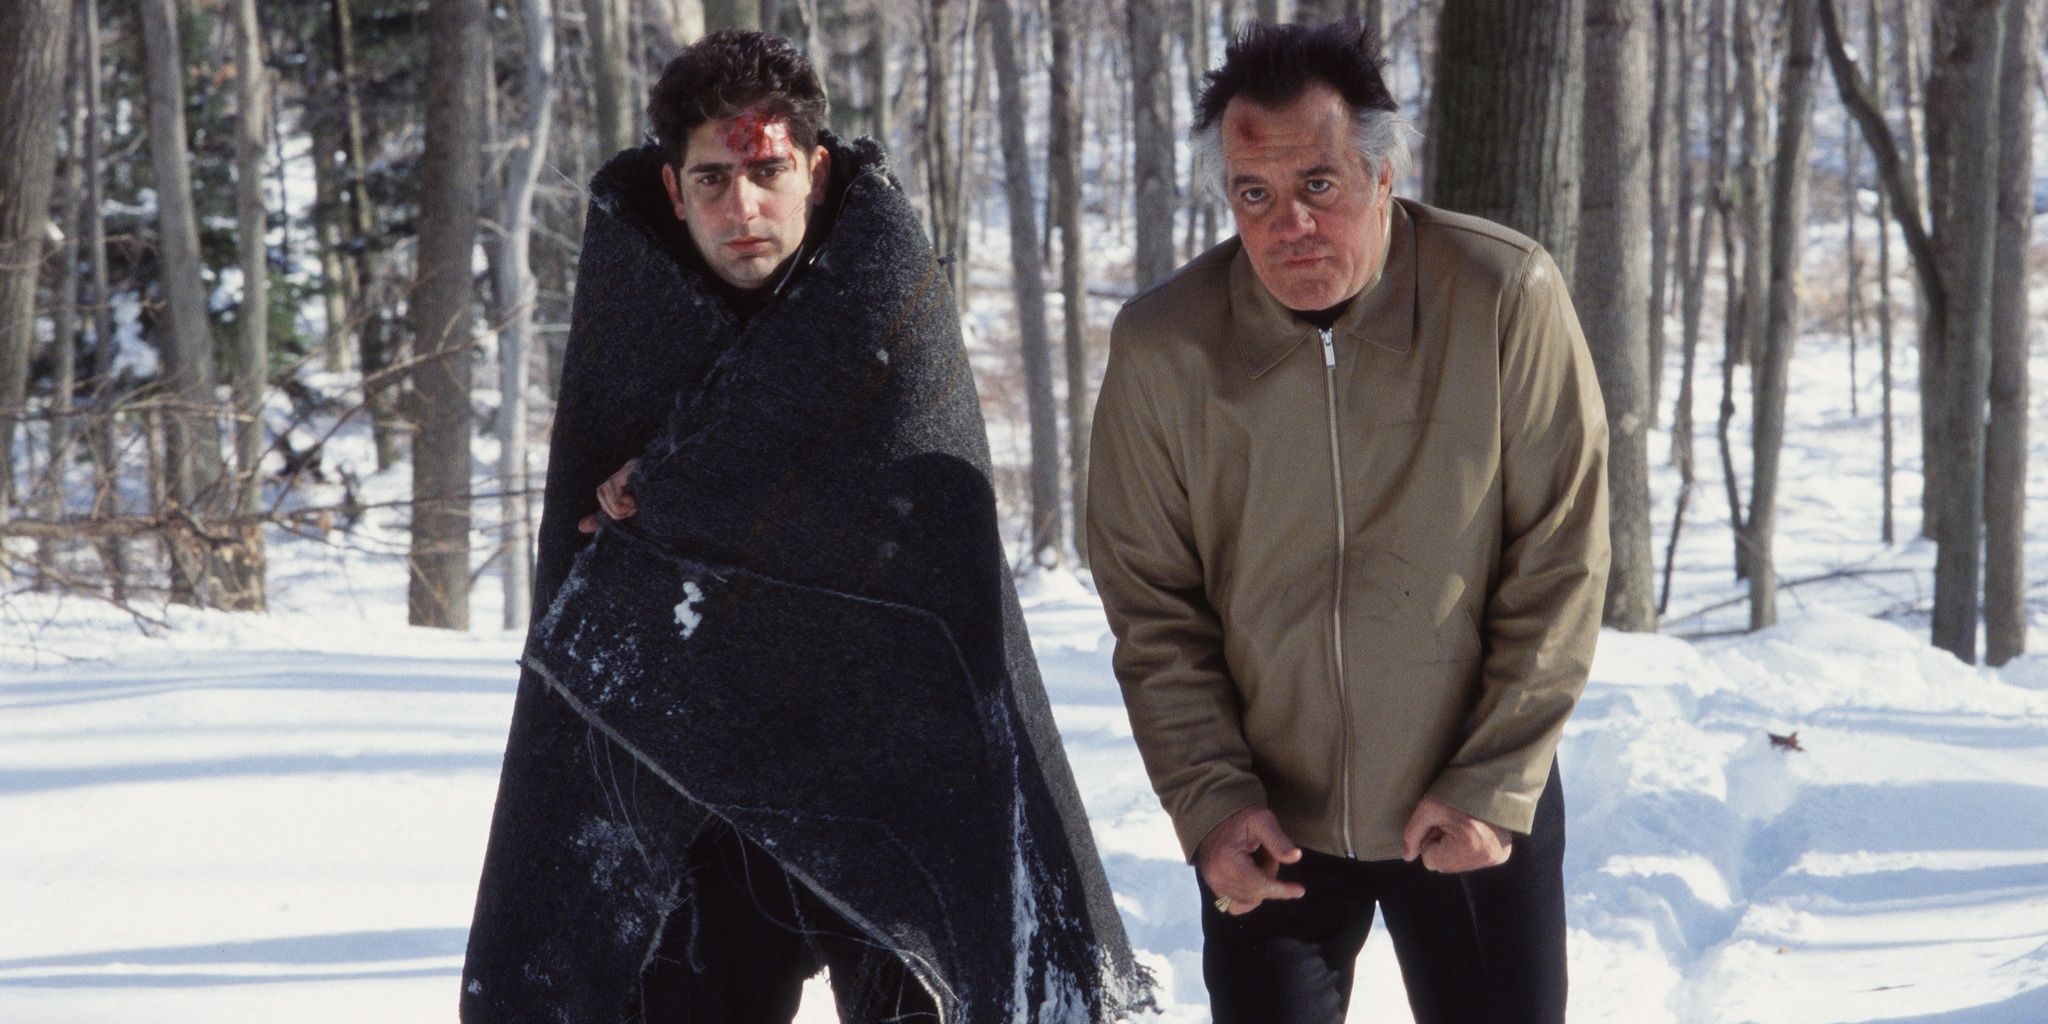 Two men freezing out in the cold forest in The Sopranos 